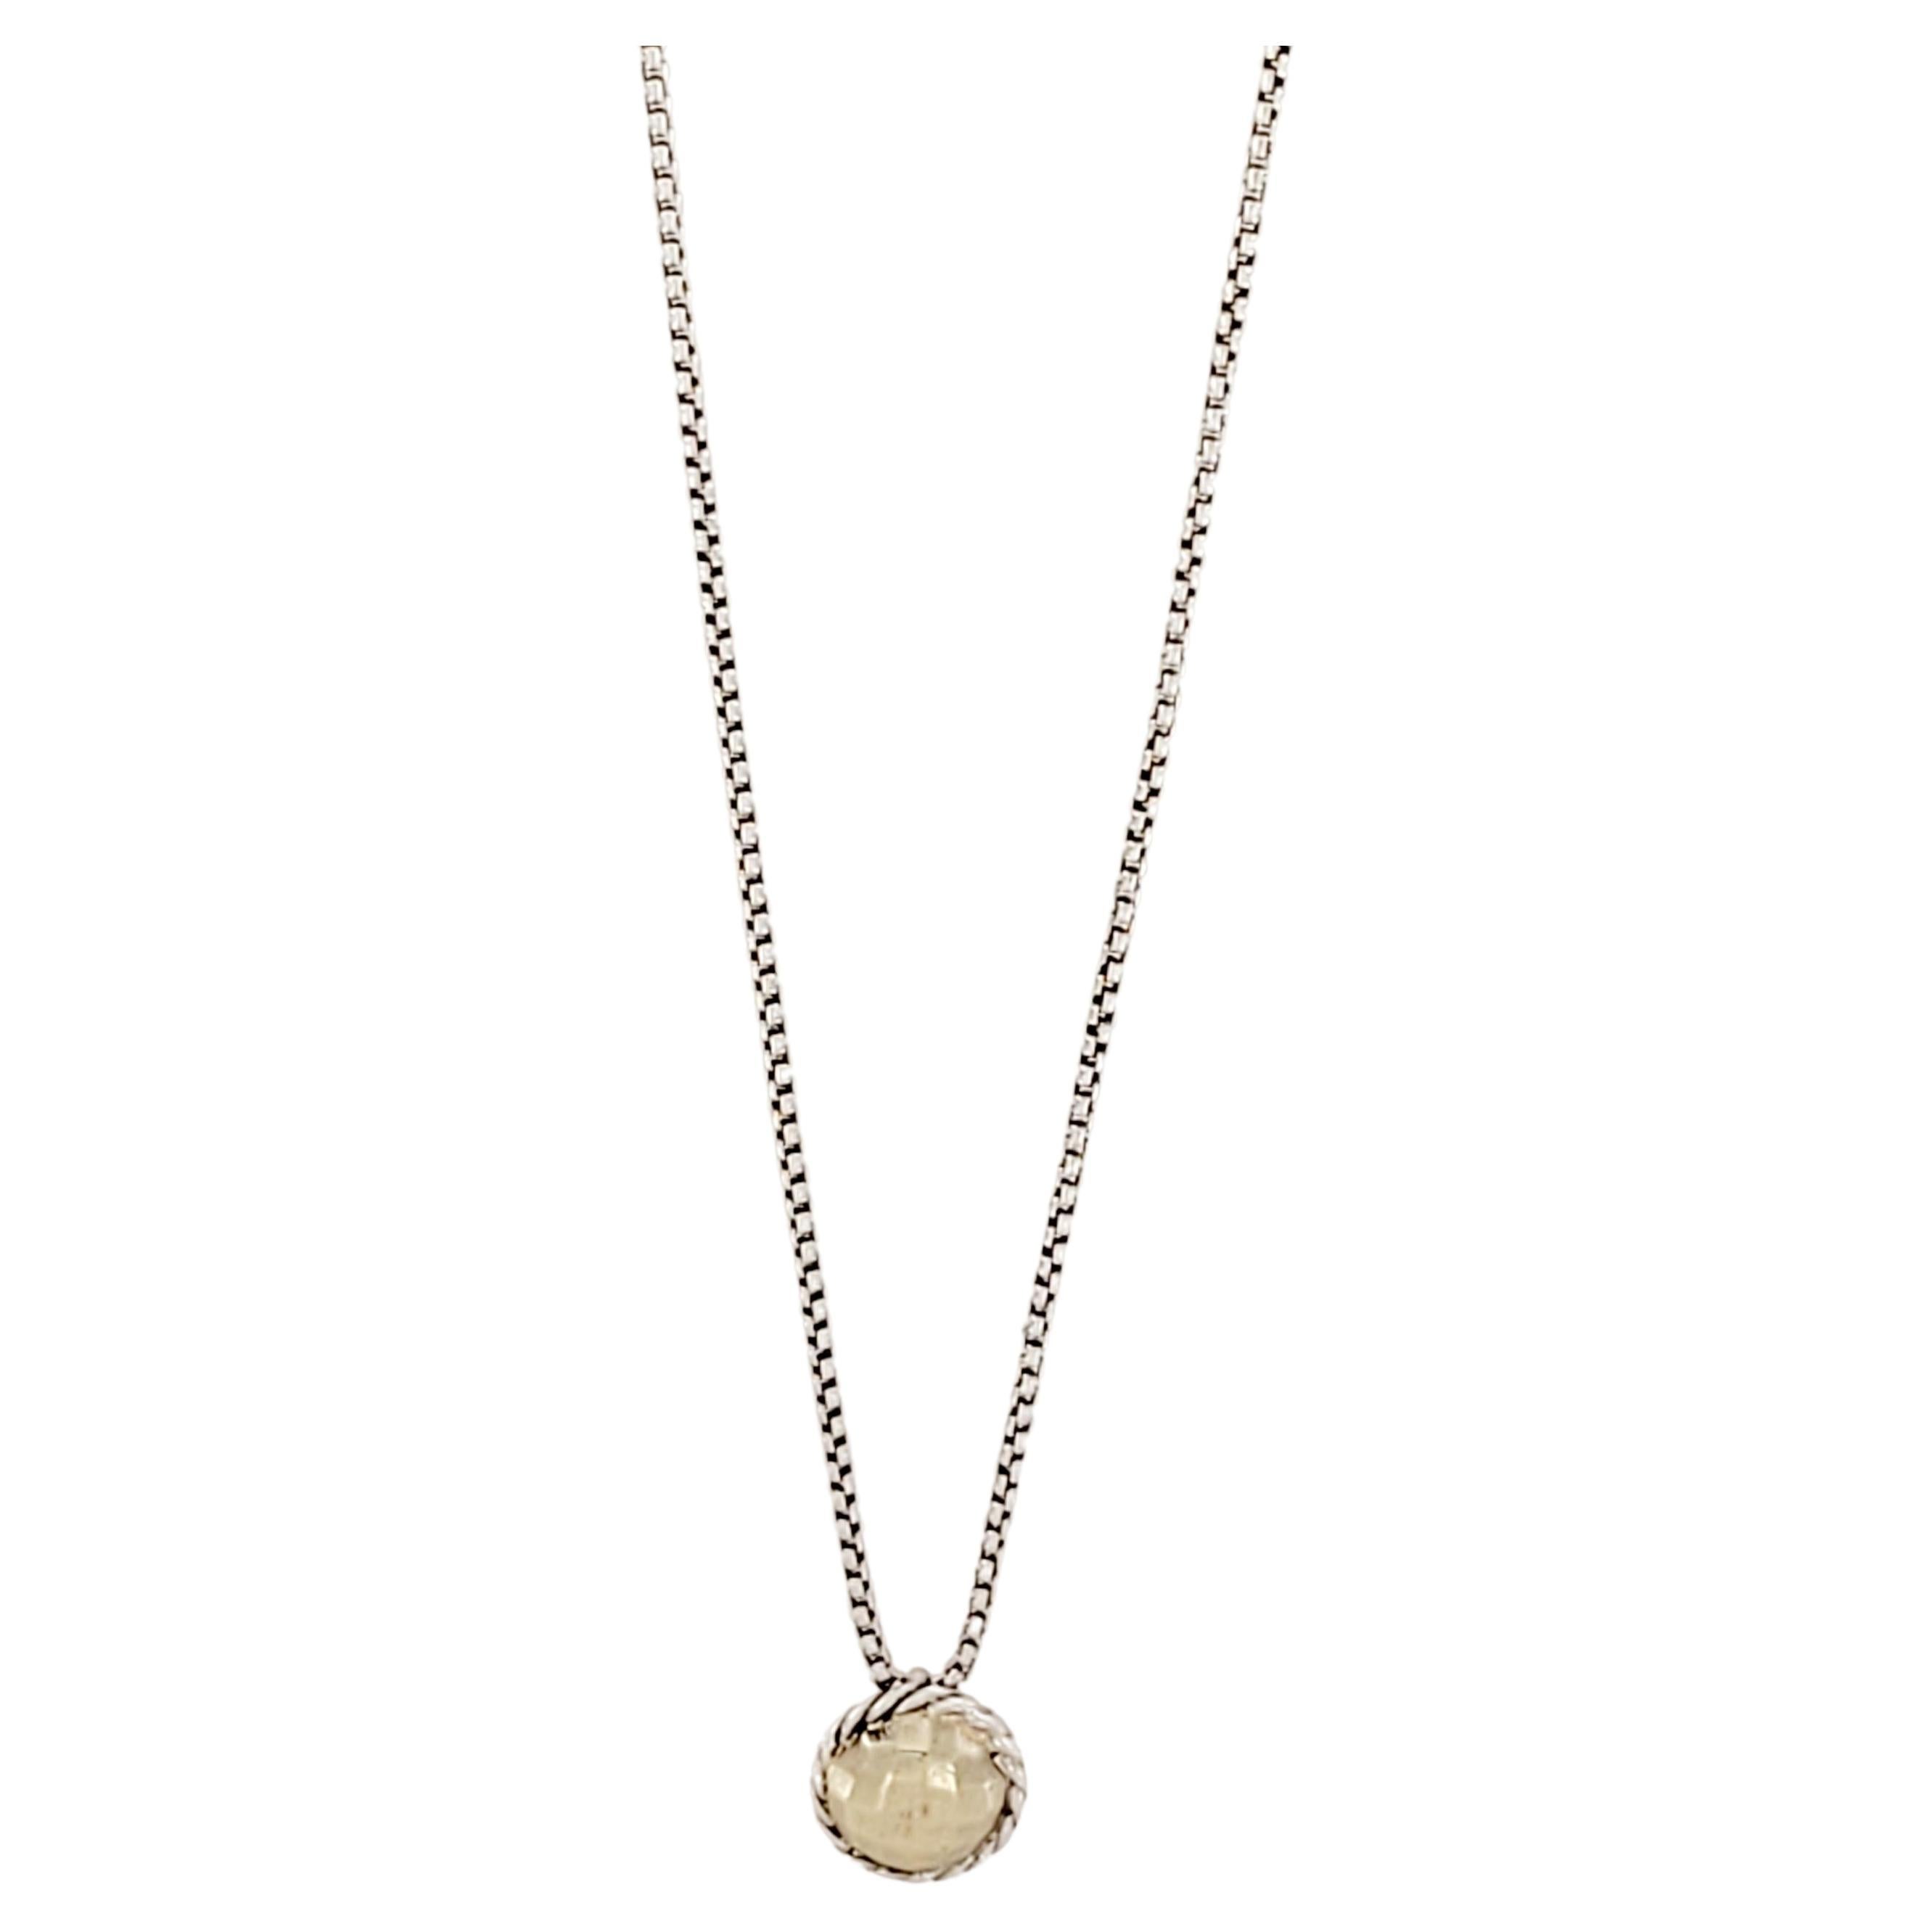 David Yurman Petite Chatelaine Pave Bezel Pendant Necklace in 18k Rose Gold  with Morganite | Lee Michaels Fine Jewelry stores